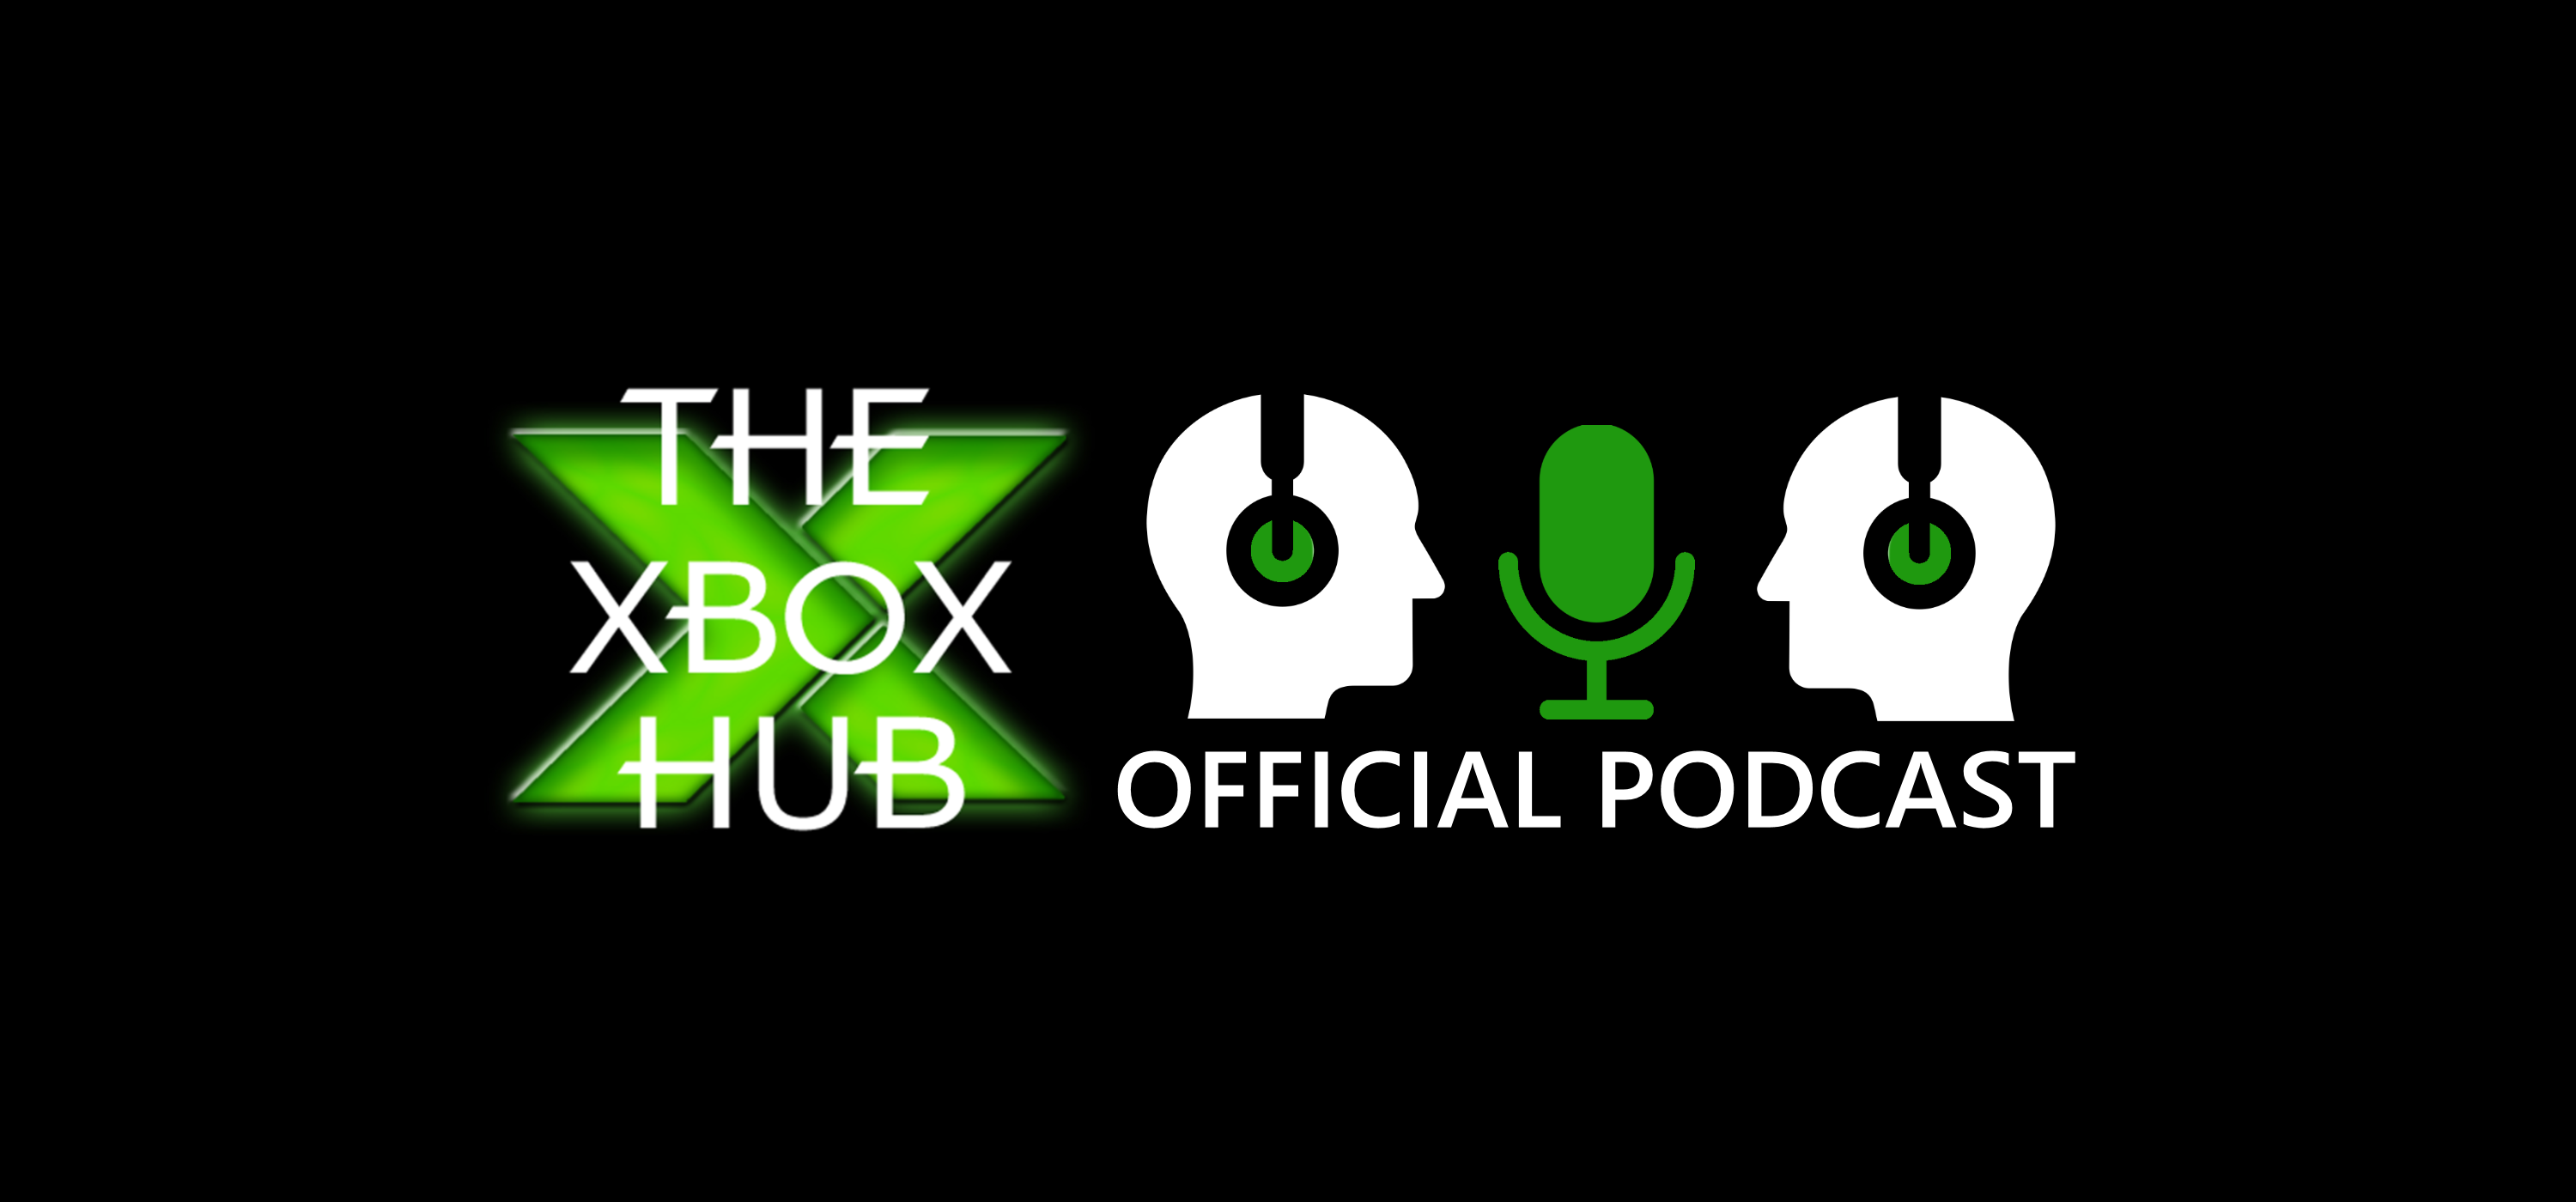 TheXboxHub Official Podcast Episode 121: Hogwarts Legacy and LEGO Star Wars The Skywalker Saga